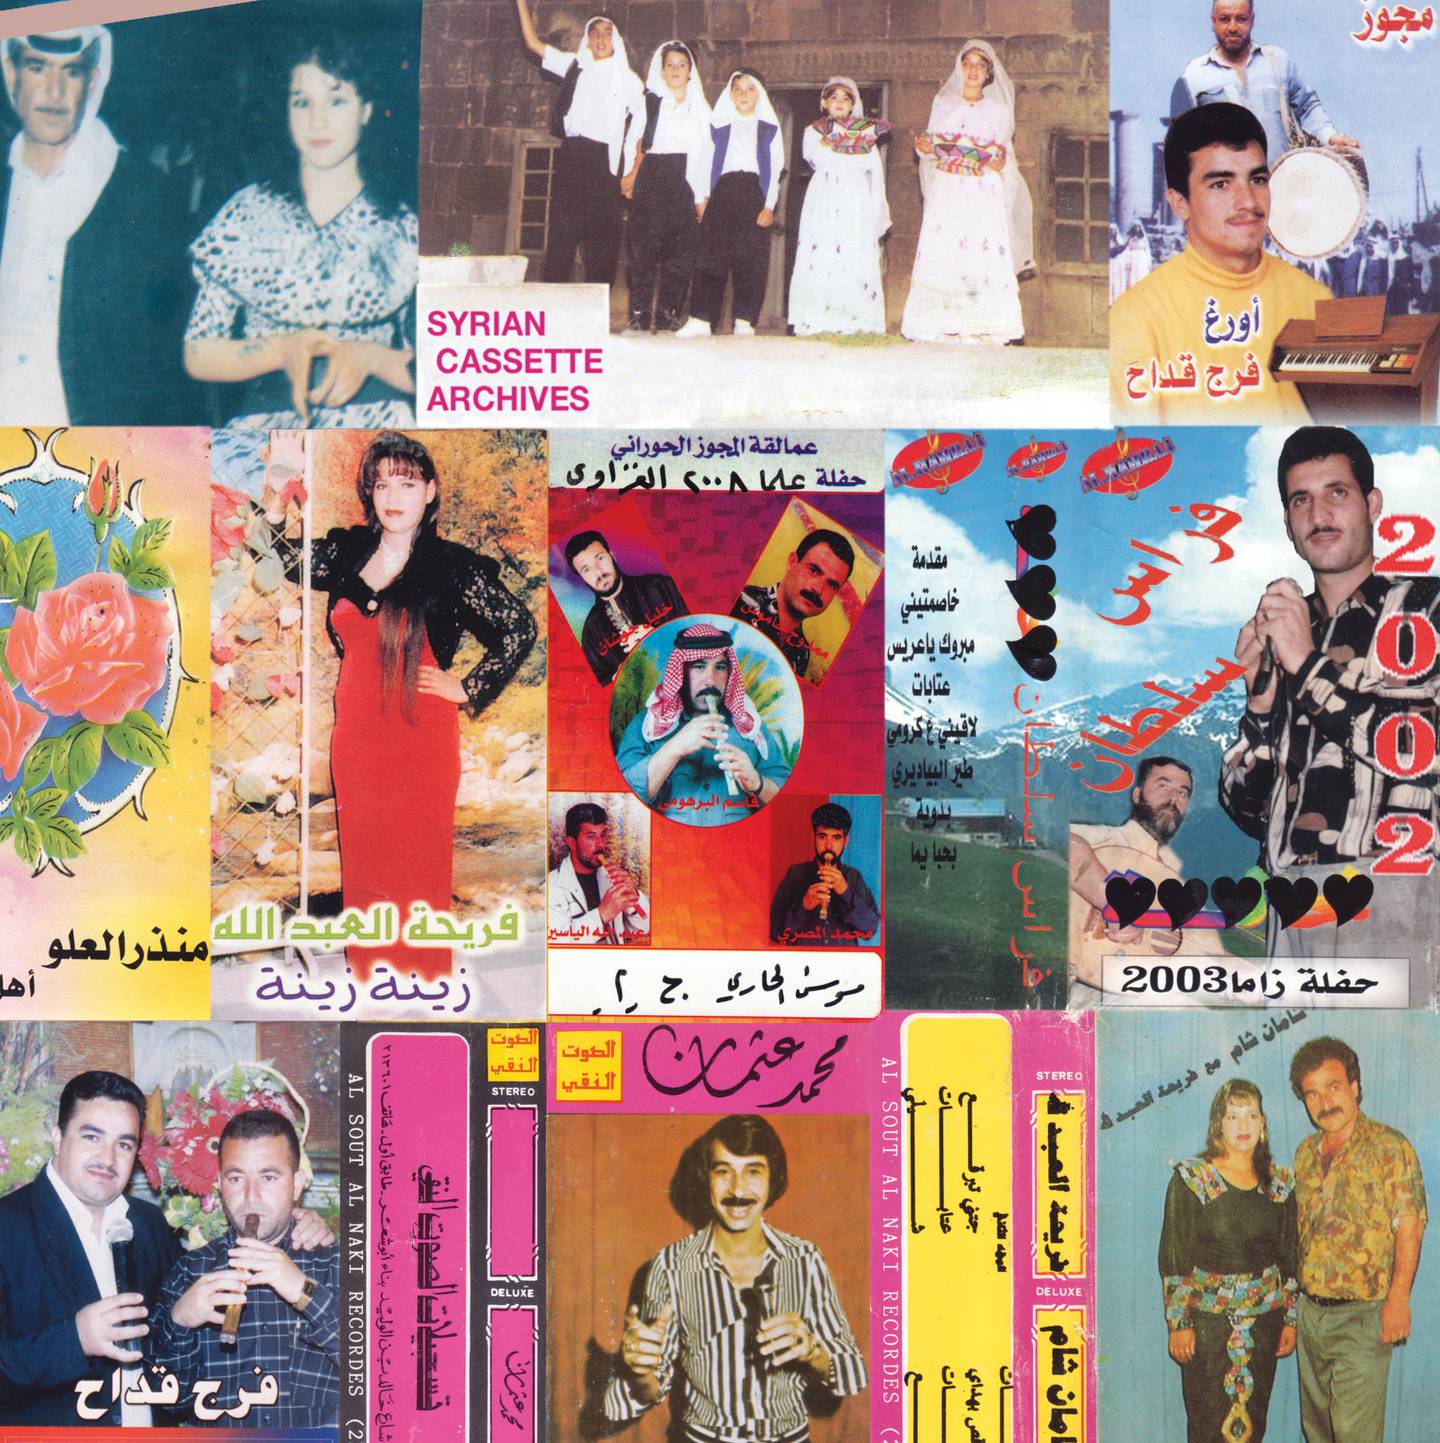 Mark Gergis turned his own collection into an online archive project that tracks the retro side of Syria's contemporary music history. Mark Gergis / Syrian Cassette Archives